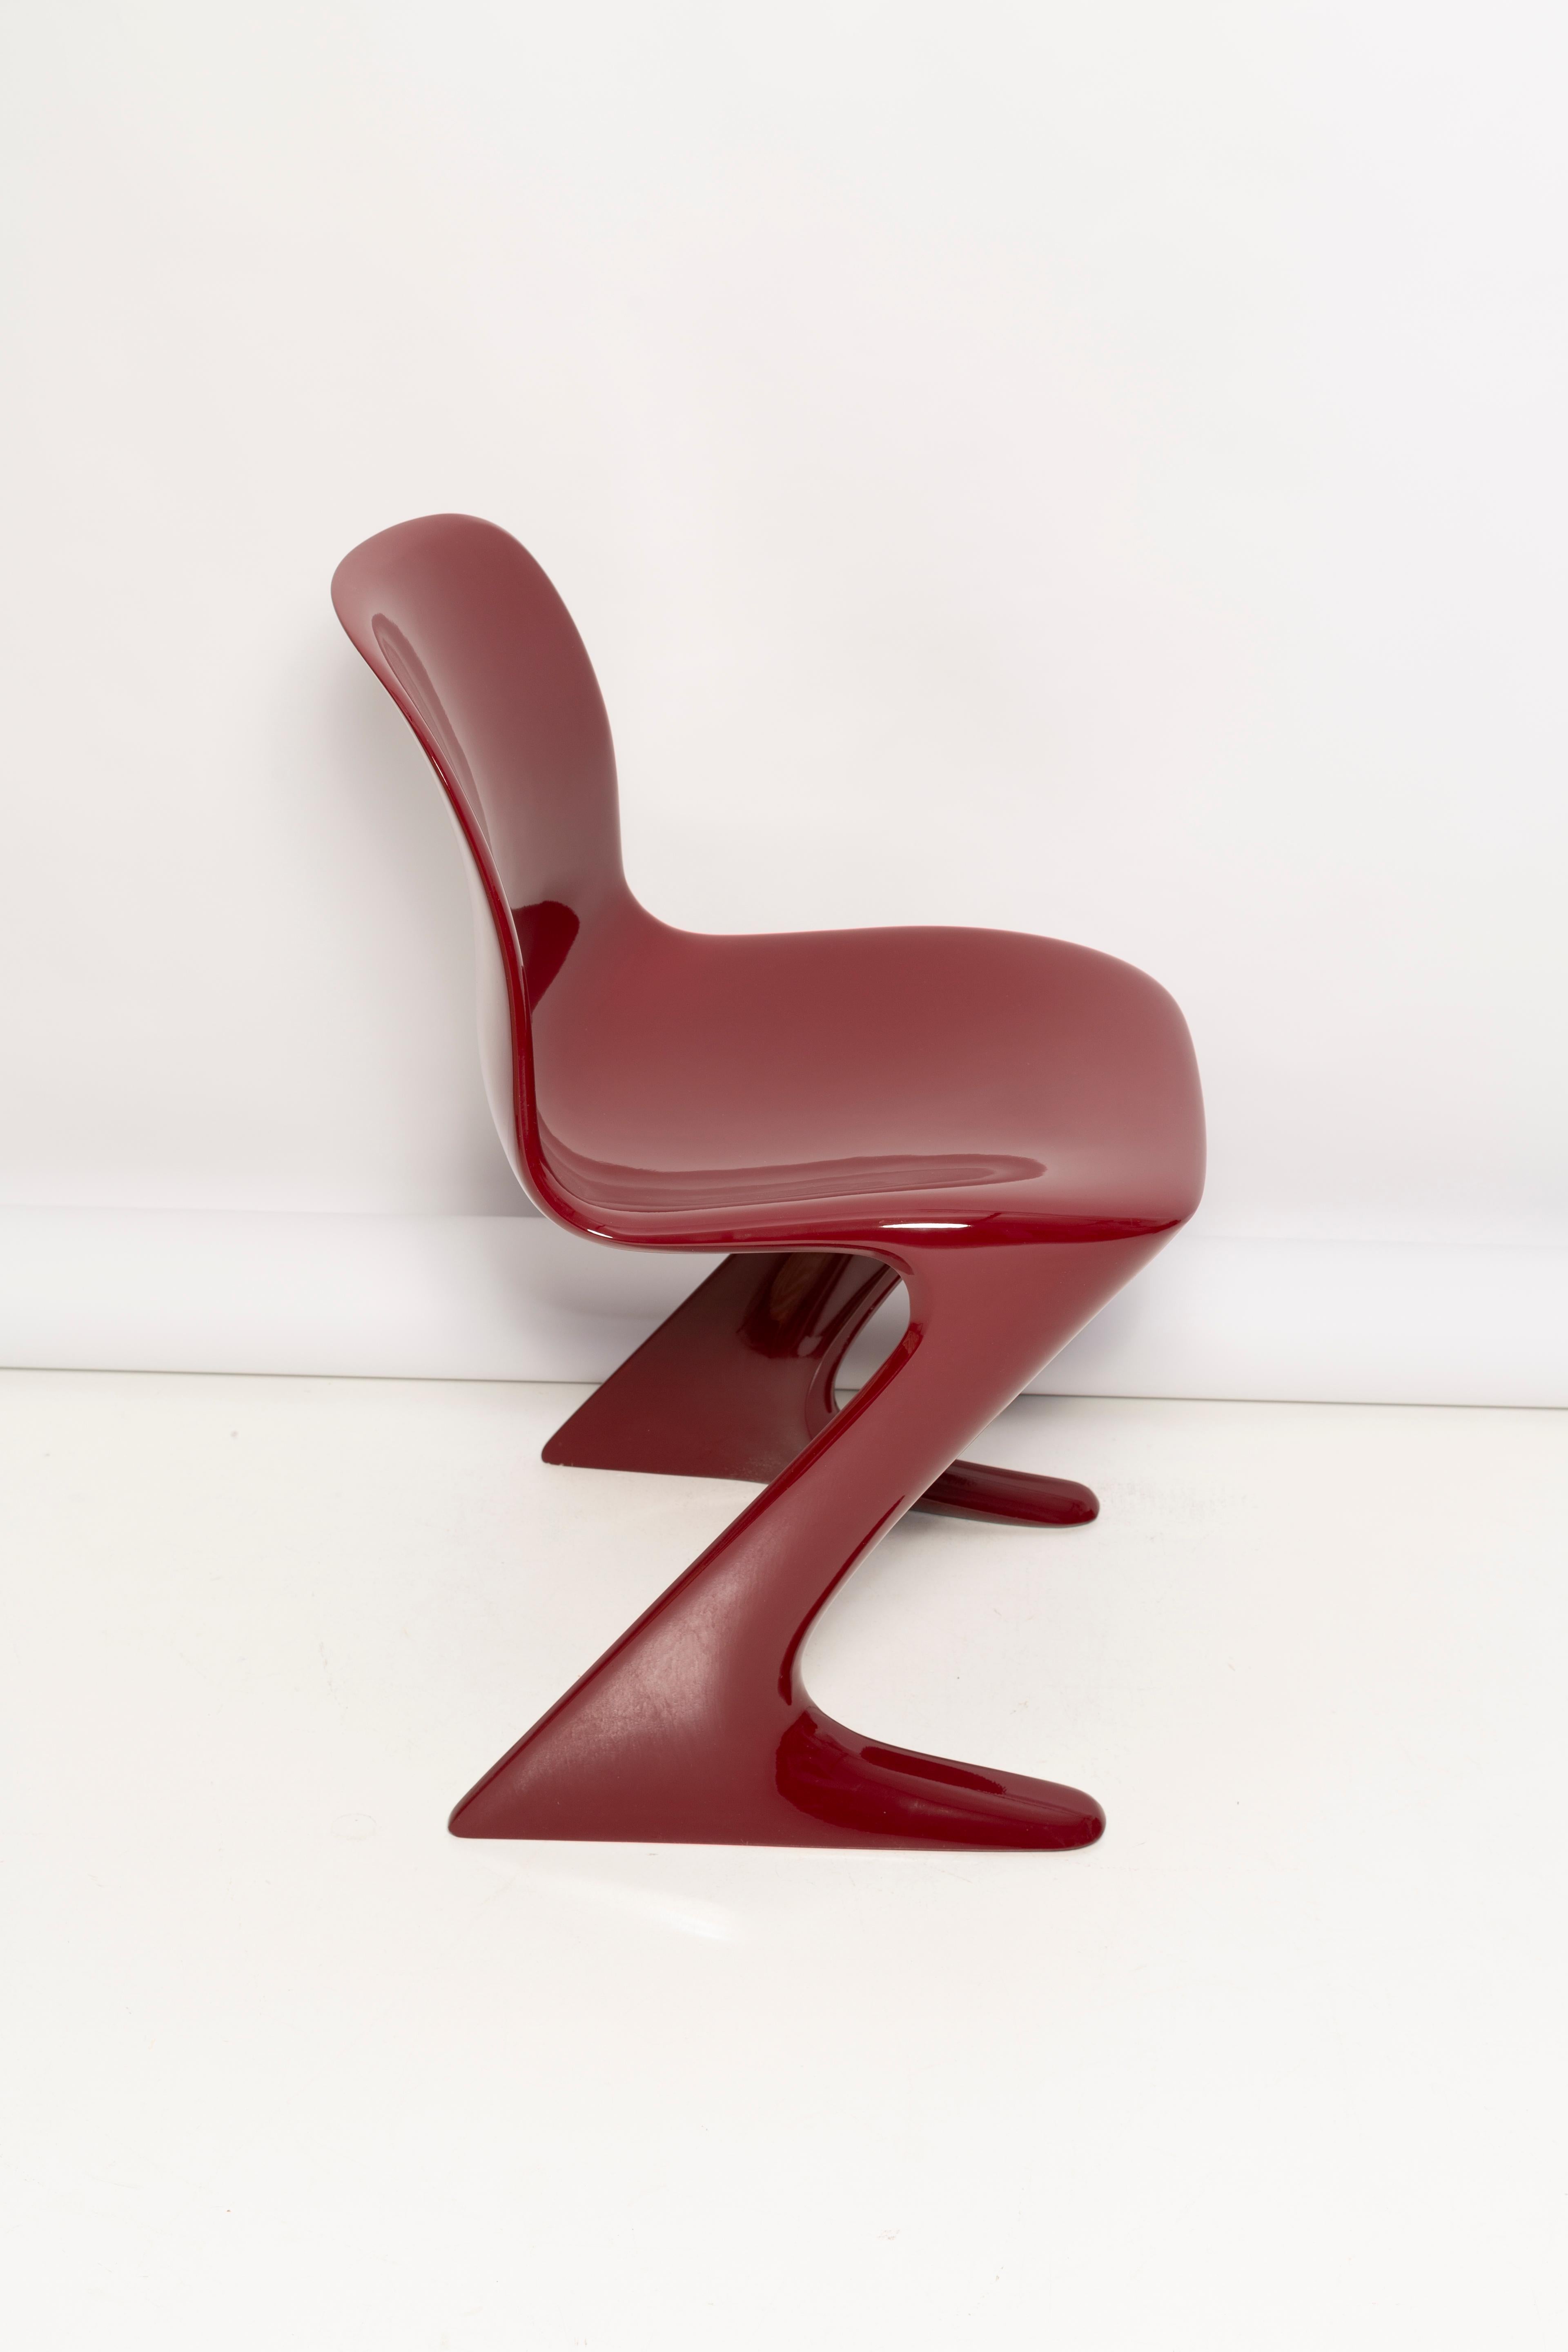 Lacquered Dark Red Wine Kangaroo Chair Designed by Ernst Moeckl, Germany, 1968 For Sale